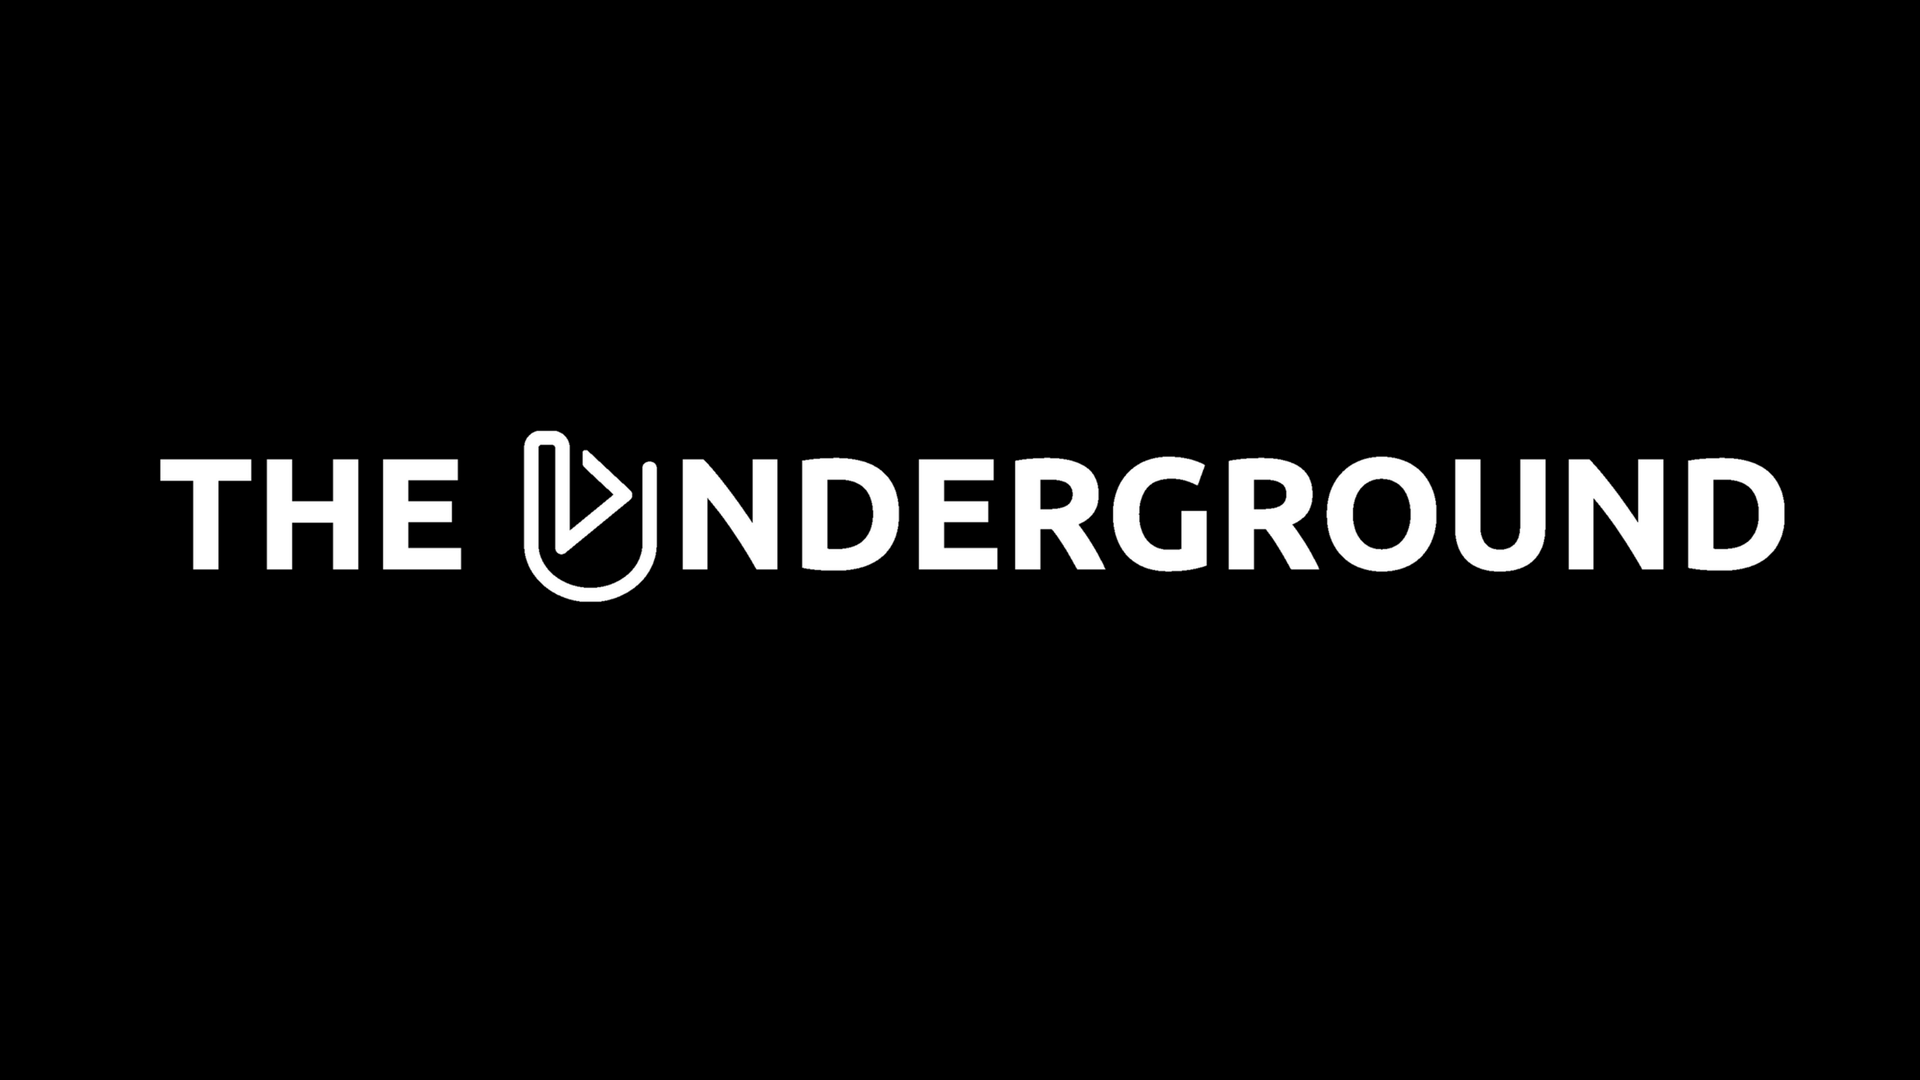 The Underground Logo - The Underground - Penn State News By Penn State Students